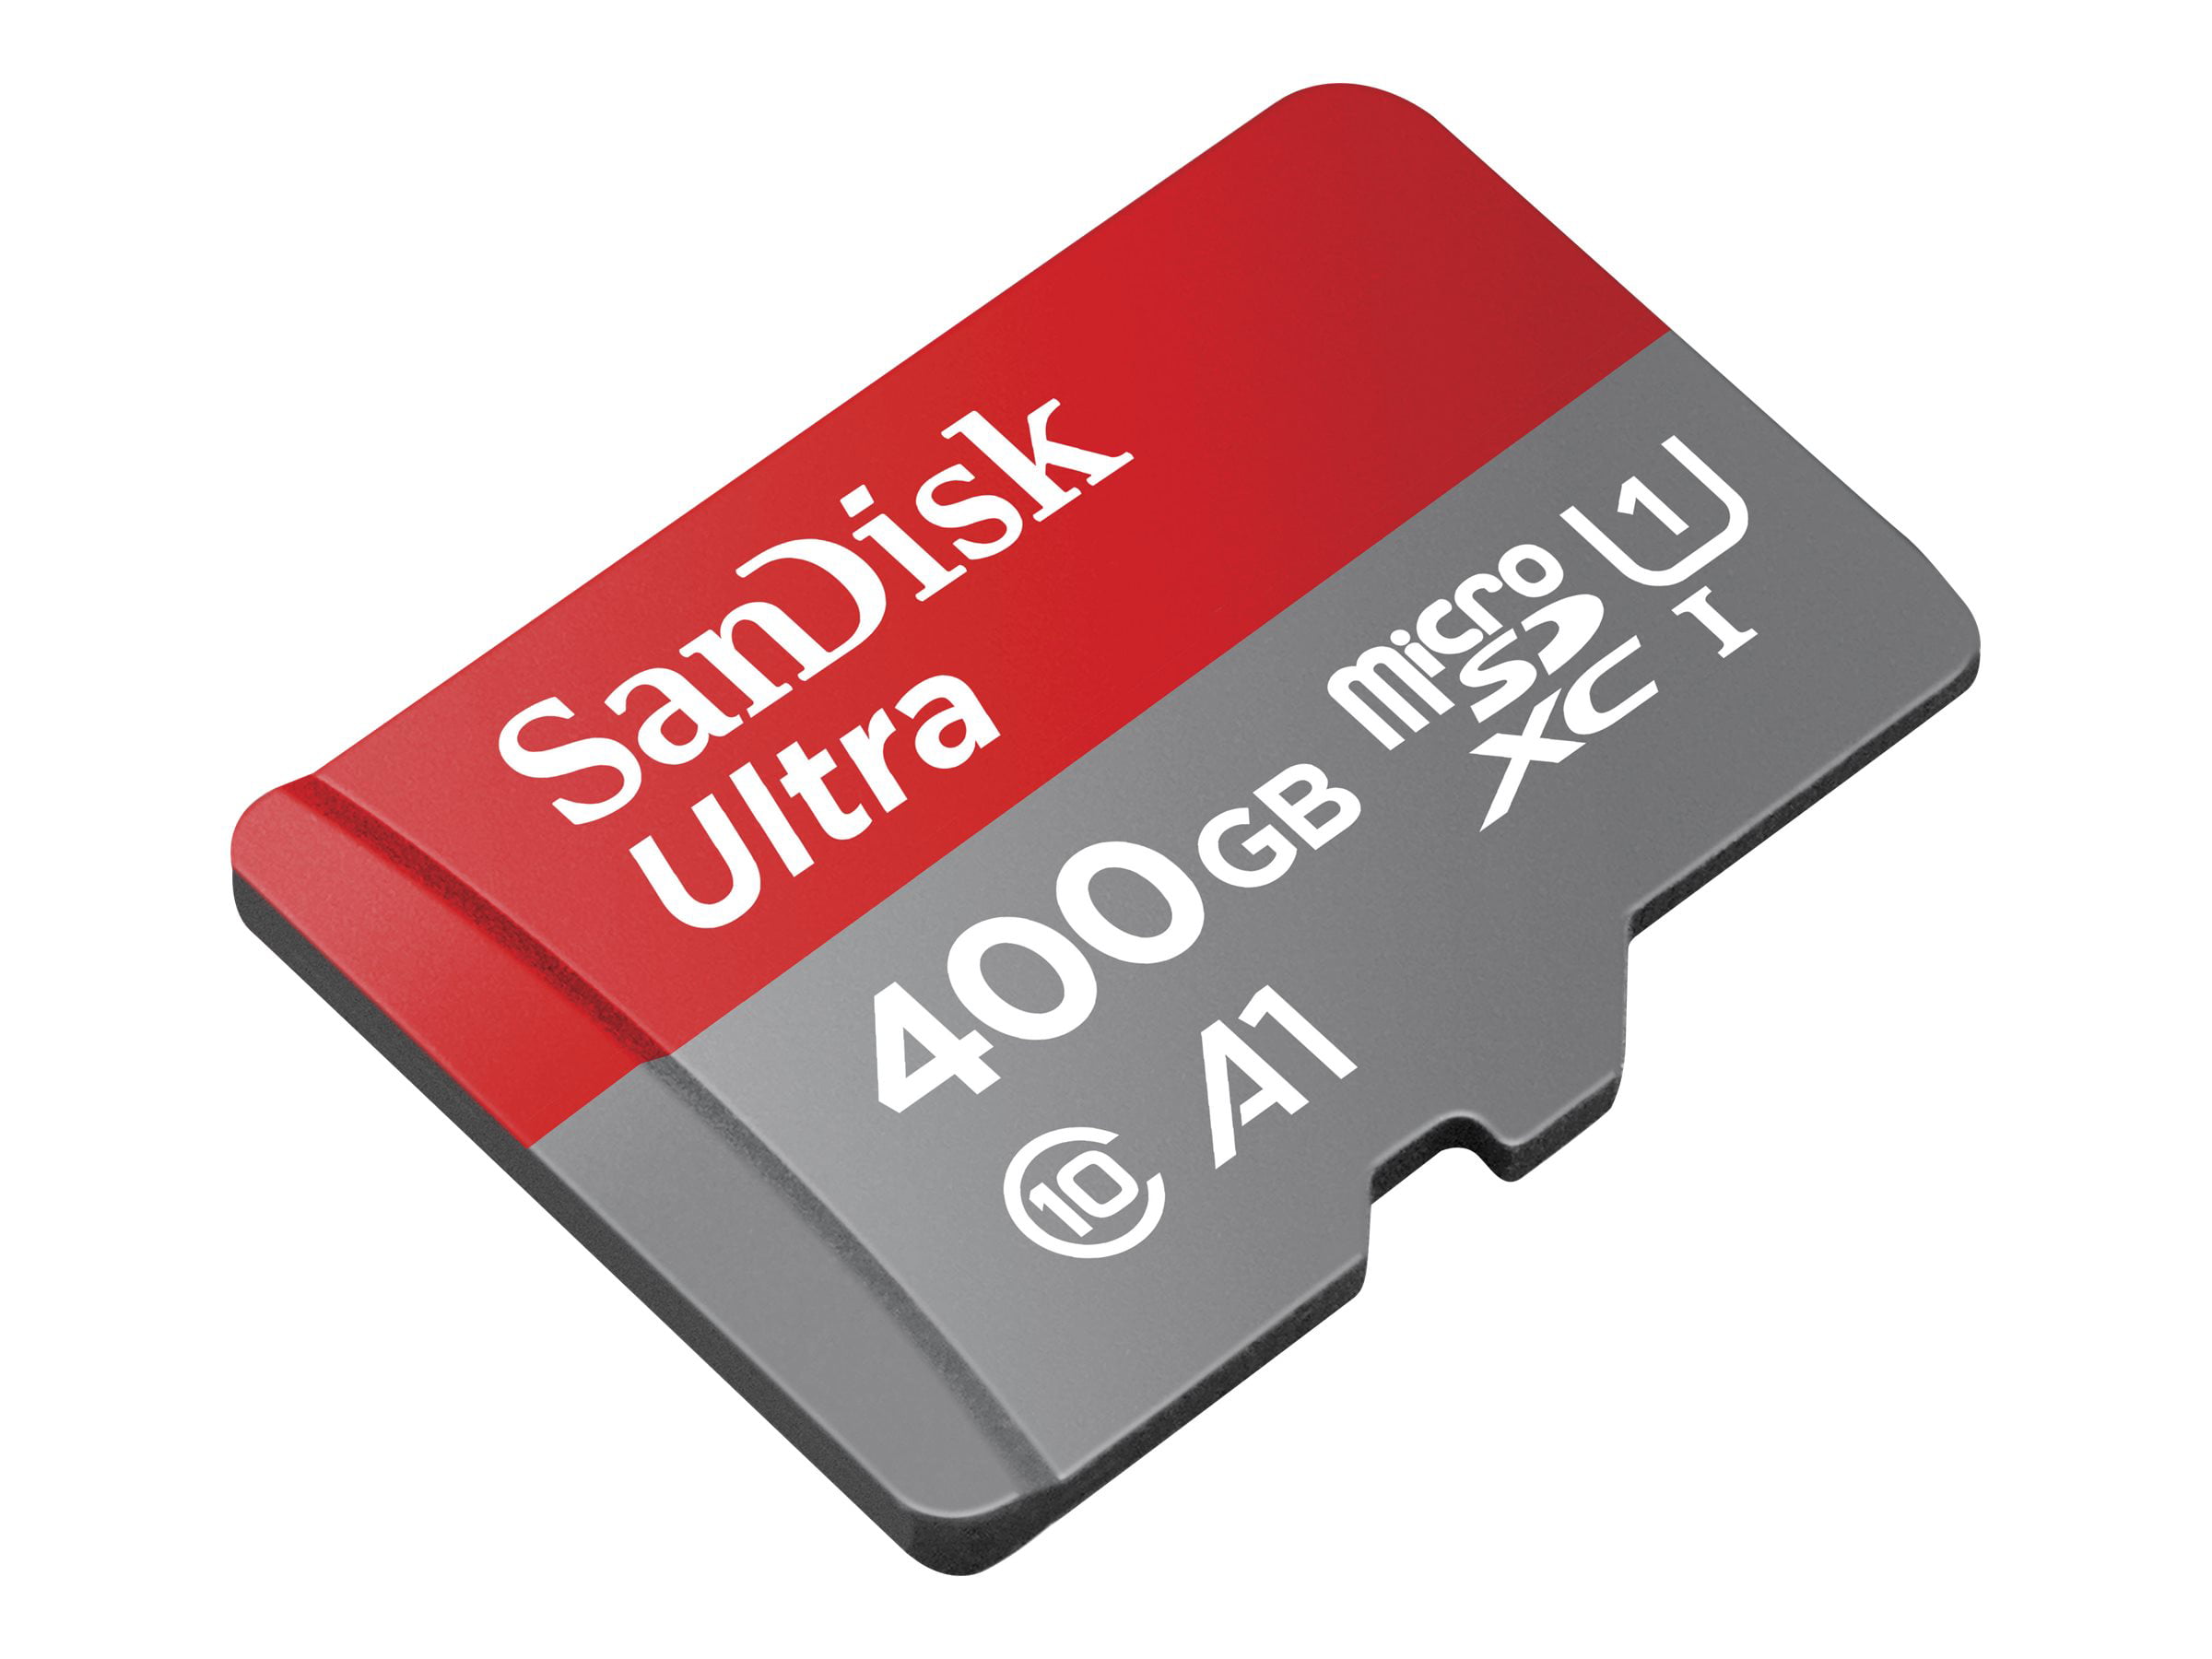 100MBs A1 U1 C10 Works with SanDisk SanDisk Ultra 200GB MicroSDXC Verified for BlackBerry Leap by SanFlash 